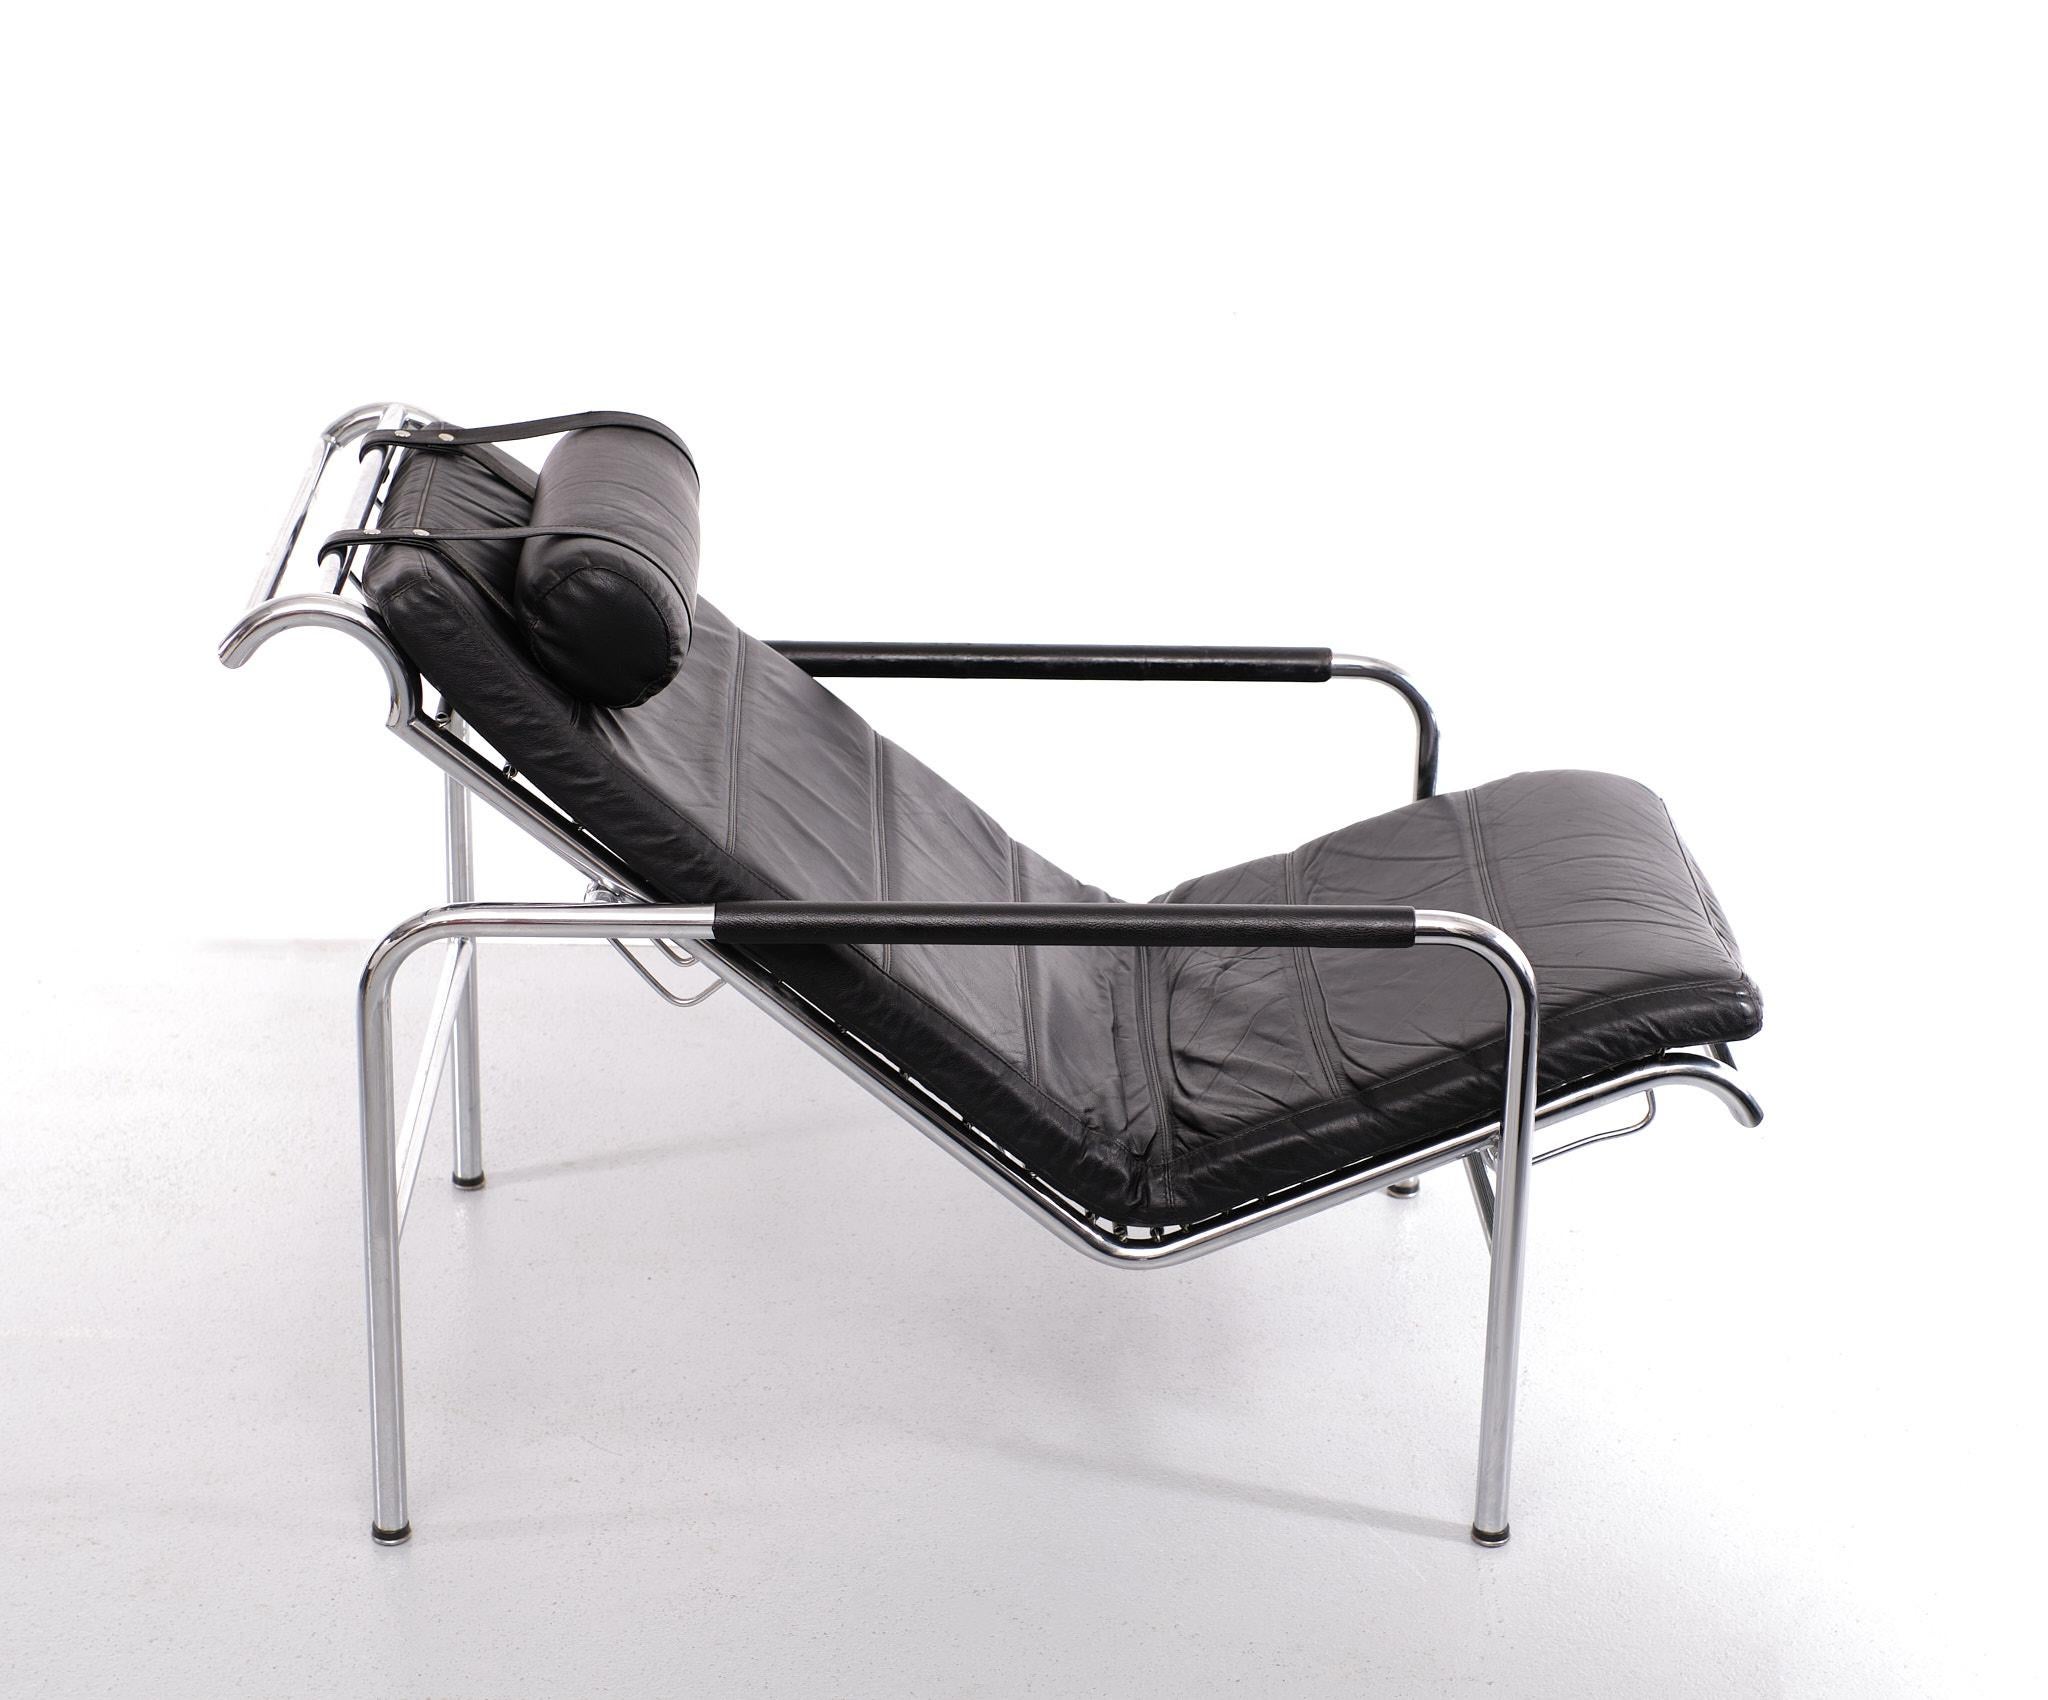 Genni chaise longue, design by Gabriele Mucchi for Zanotta. Designed in 1935 by Gabriele Mucchi, the Genny chaise longue is as elegant and modern as ever. This comfortable chaise longue is perfect for elegant lounges and living rooms.

The sleek